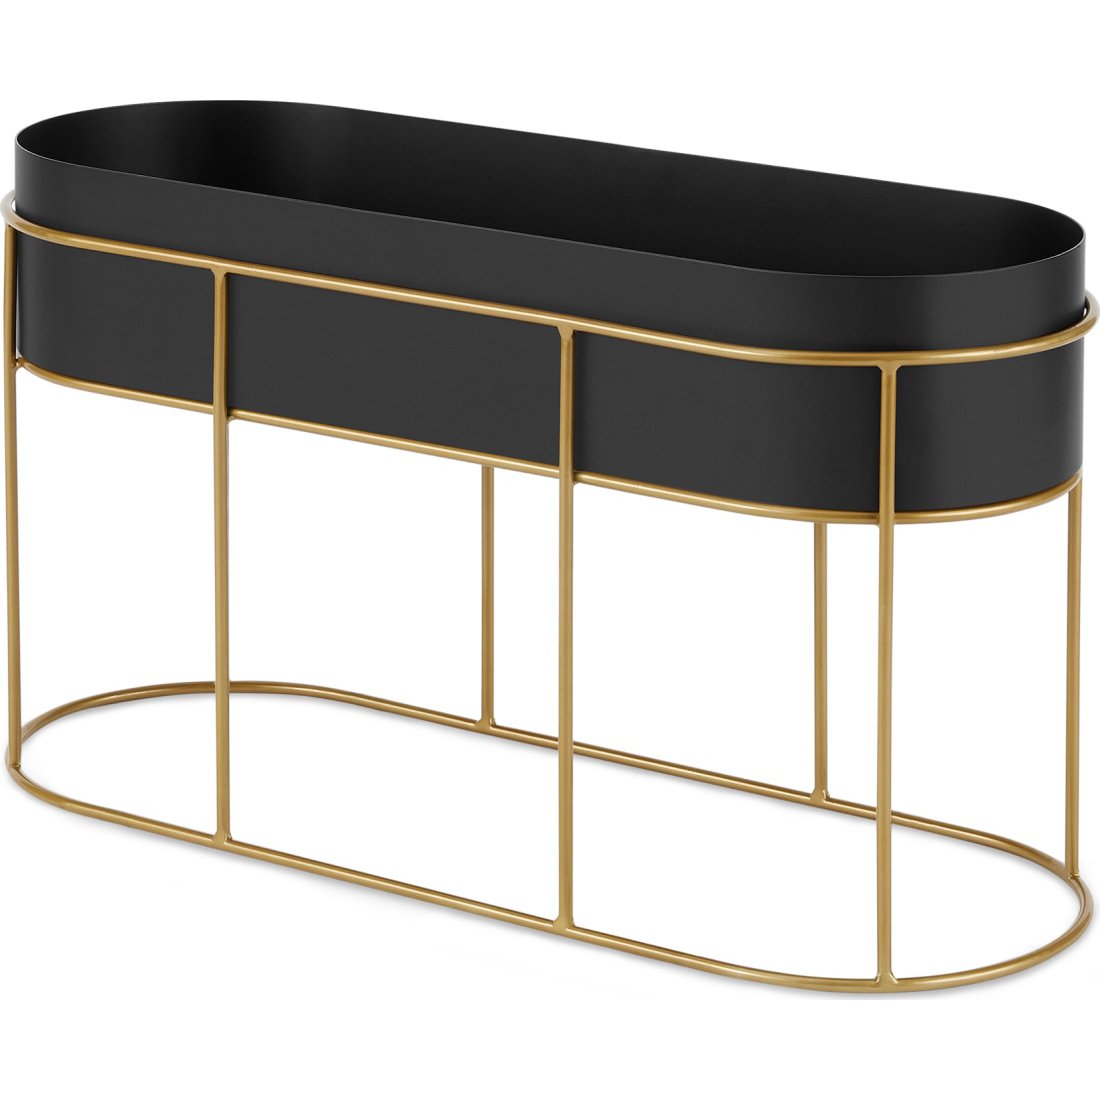 Echo Free-Standing Oval High Powder-Coated Plant Stand, Black & Gold